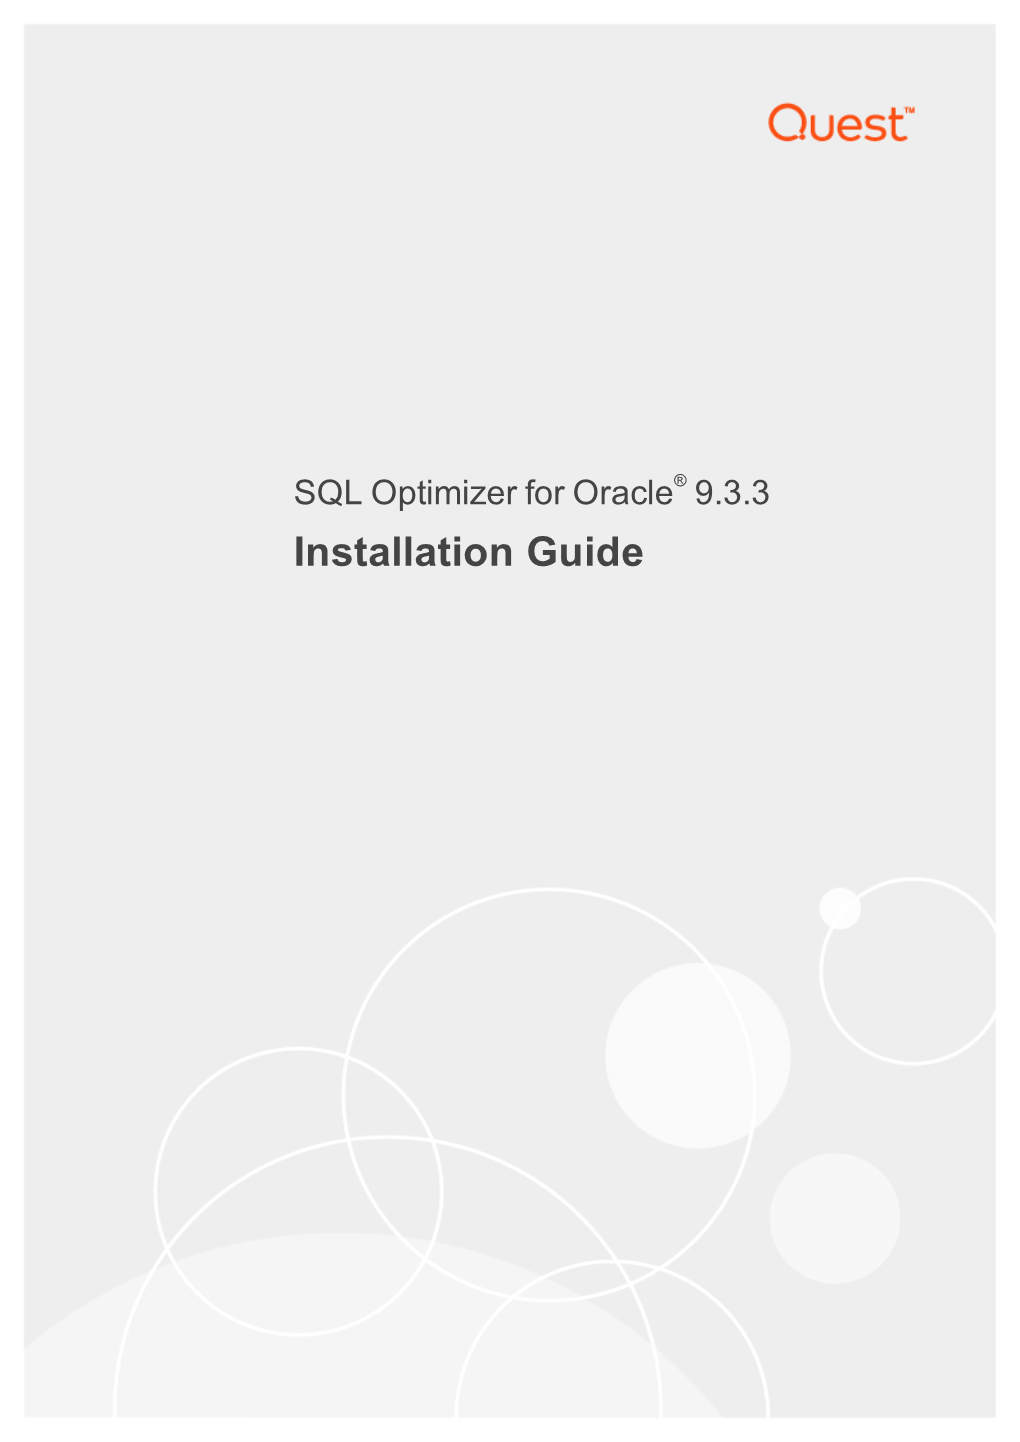 SQL Optimizer for Oracle Installation Guide